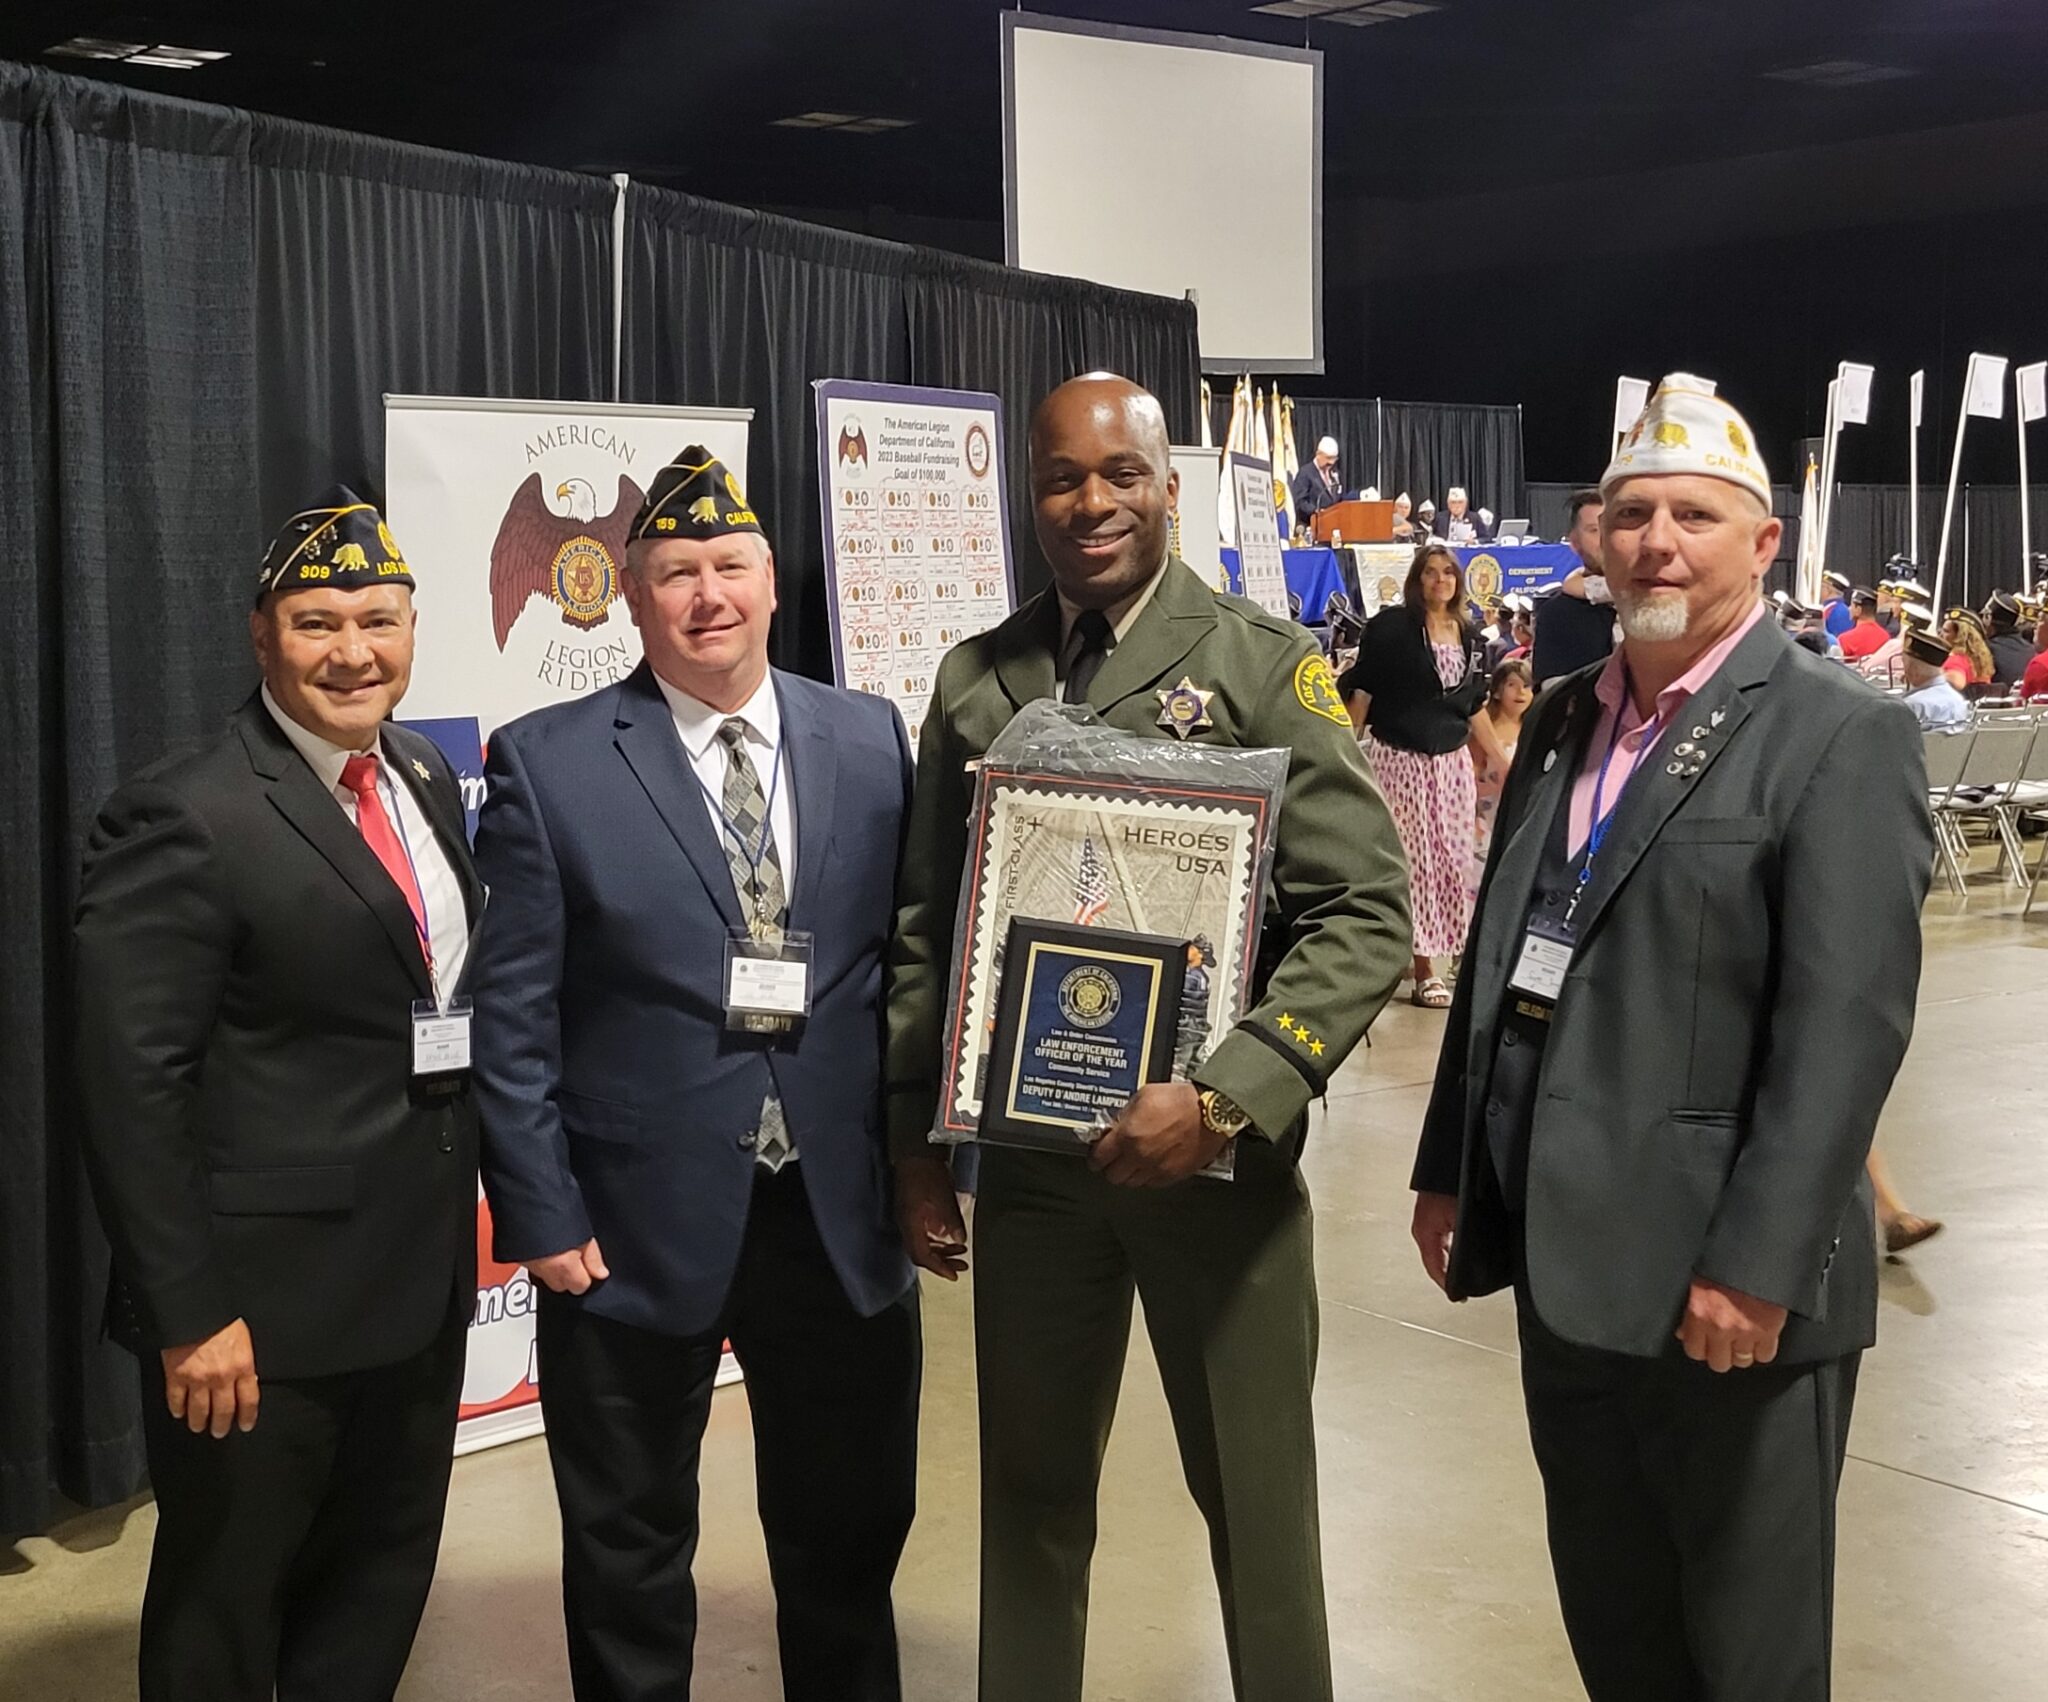 D'Andre Lampkin stands with American Legion California Department Law & Order Award committee members